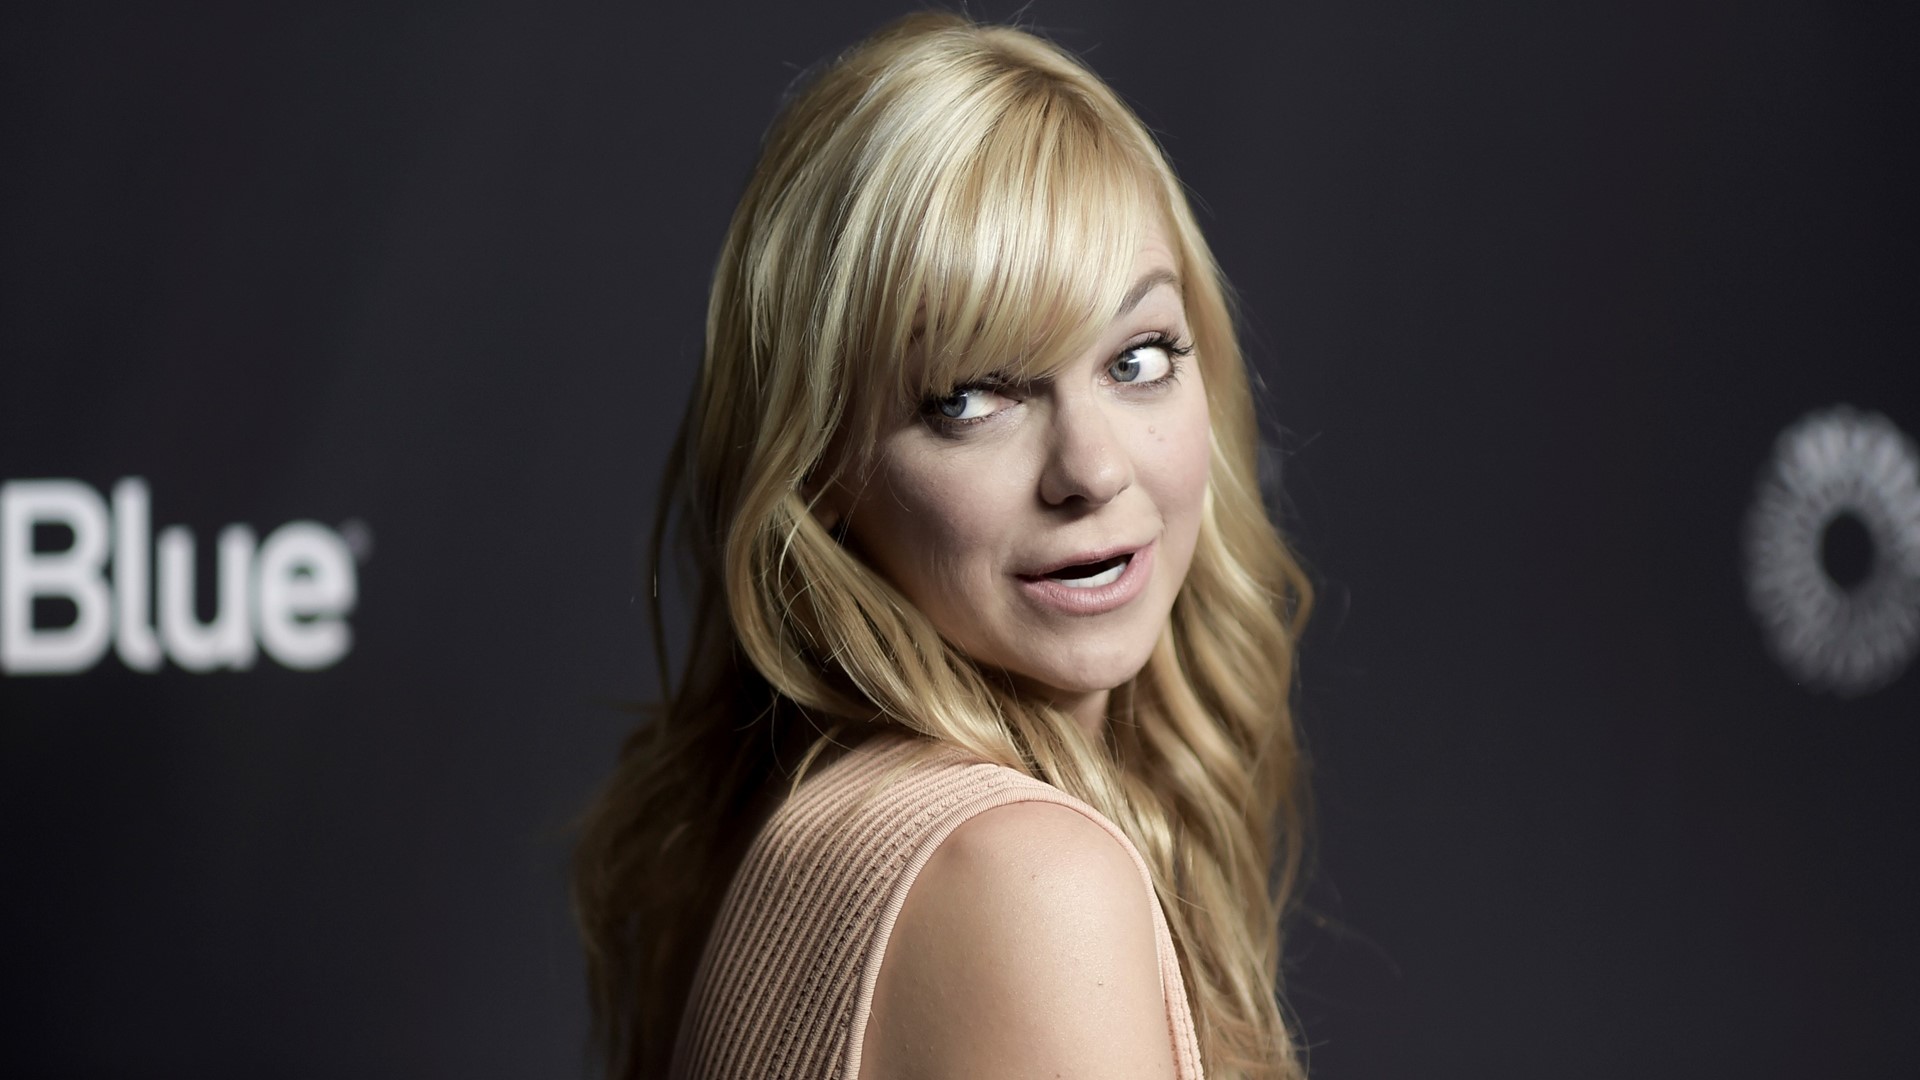 Actress Anna Faris had quite the scare Thanksgiving weekend when some of her family members were rushed to the hospital because of a carbon monoxide scare in Tahoe.